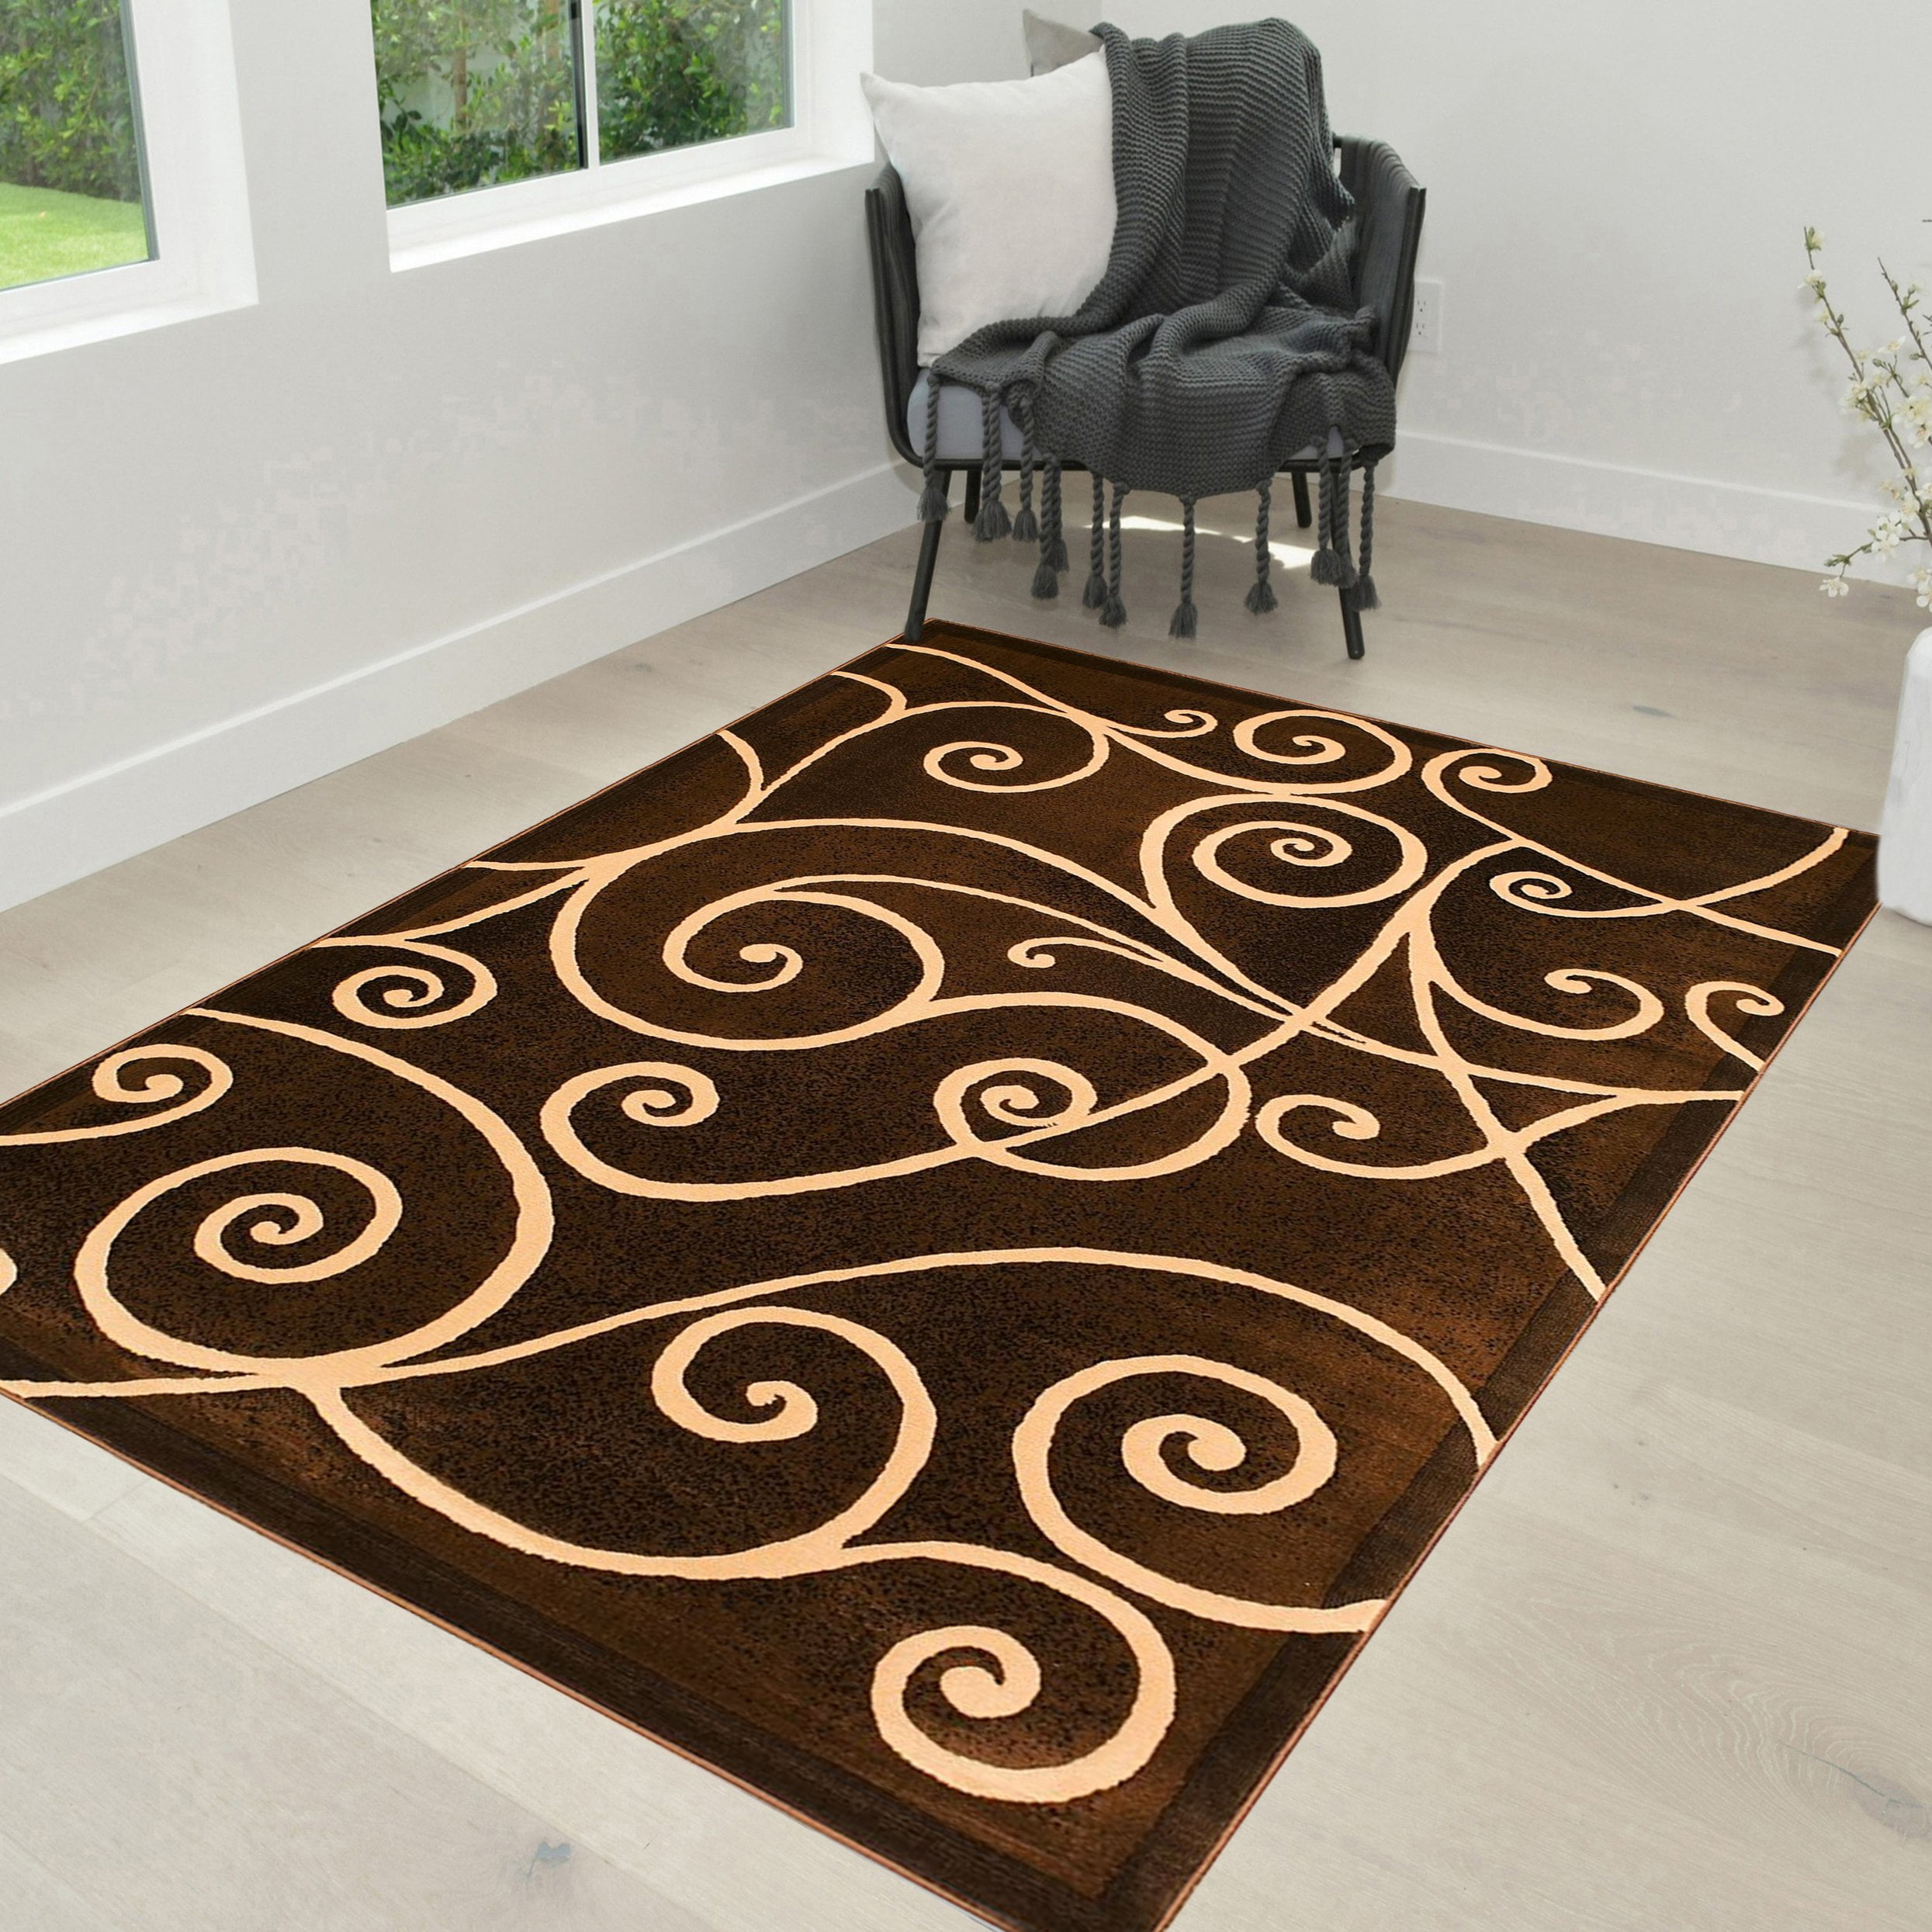 Swirls 3D Carved Modern Luxury Thick Silky Soft Pile Floor Room Rug Turquoise